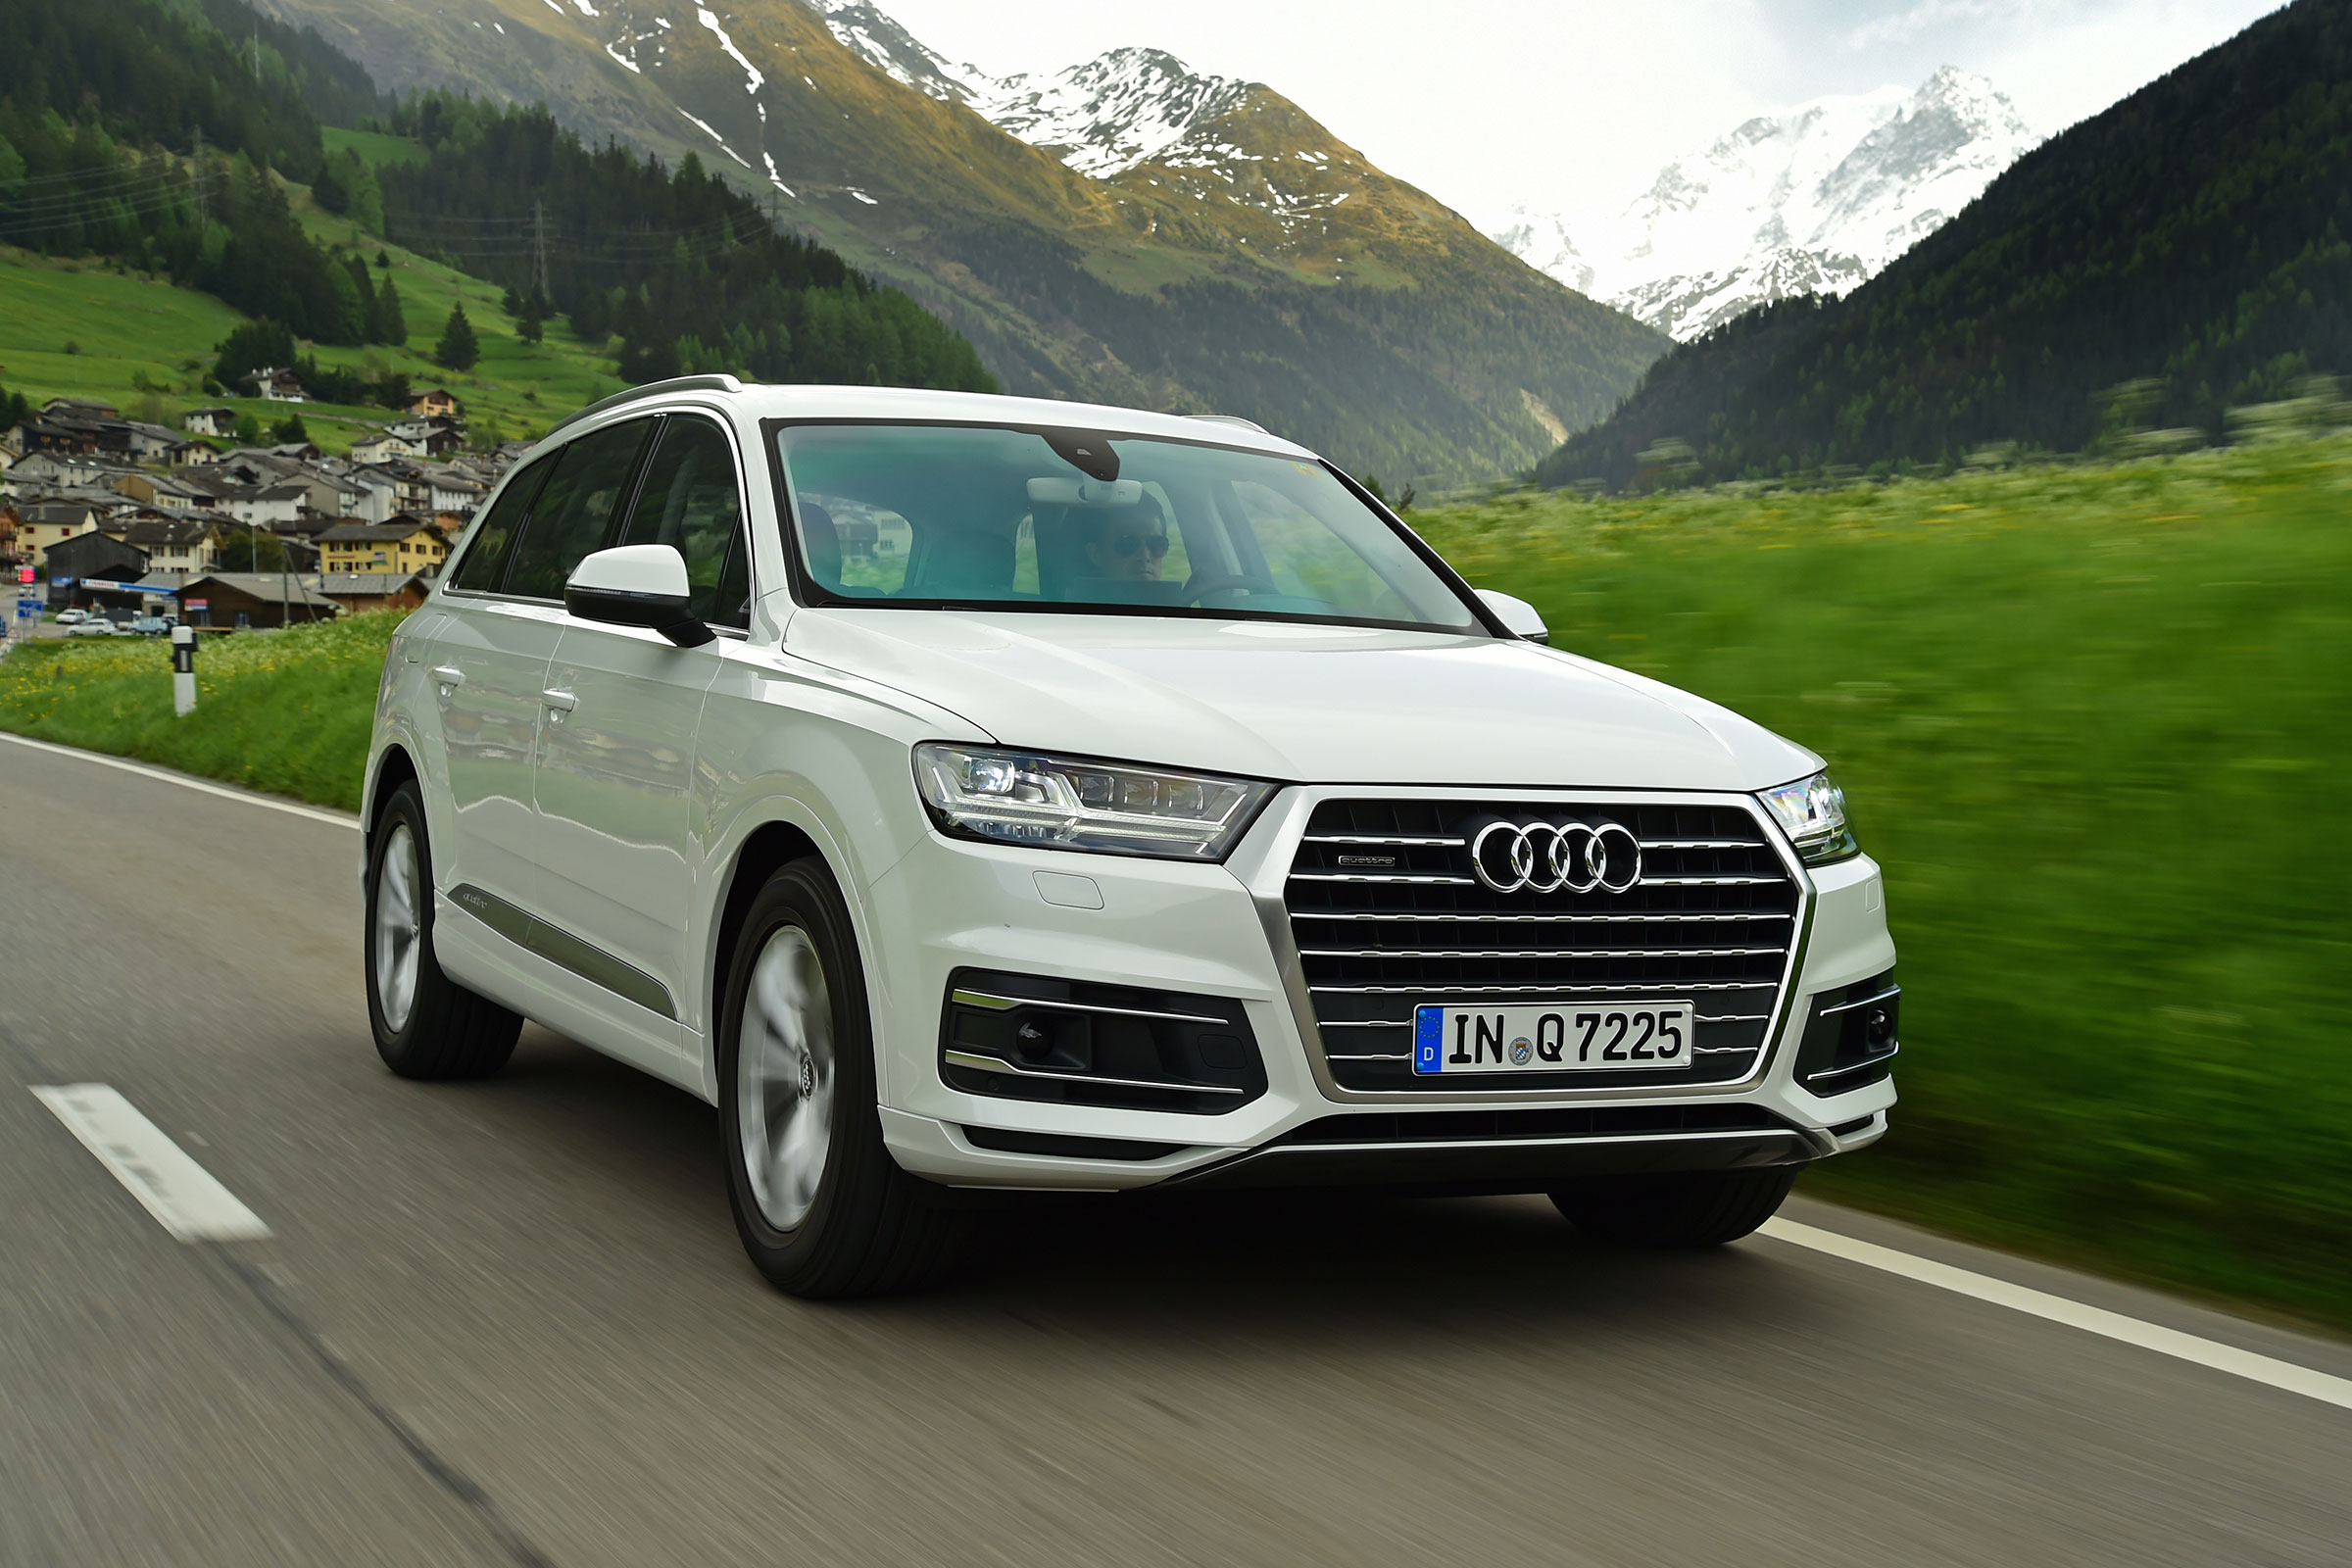 7 - The Least Reliable Cars You Can Buy - Audi Q7